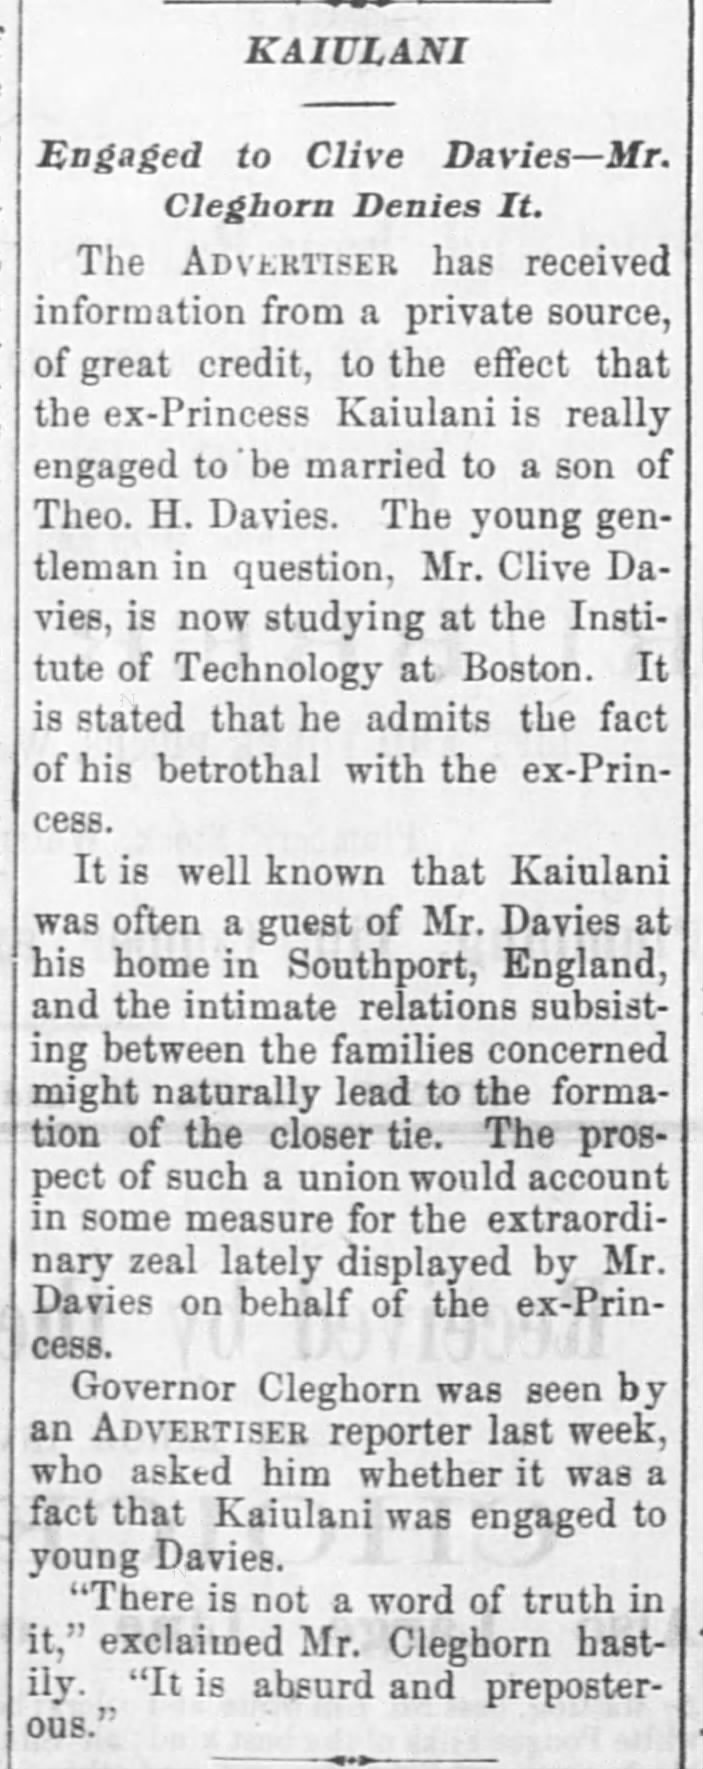 Kaiulani alleged engagement to Clive Davies, son of Theo H. Davies - her father denies it